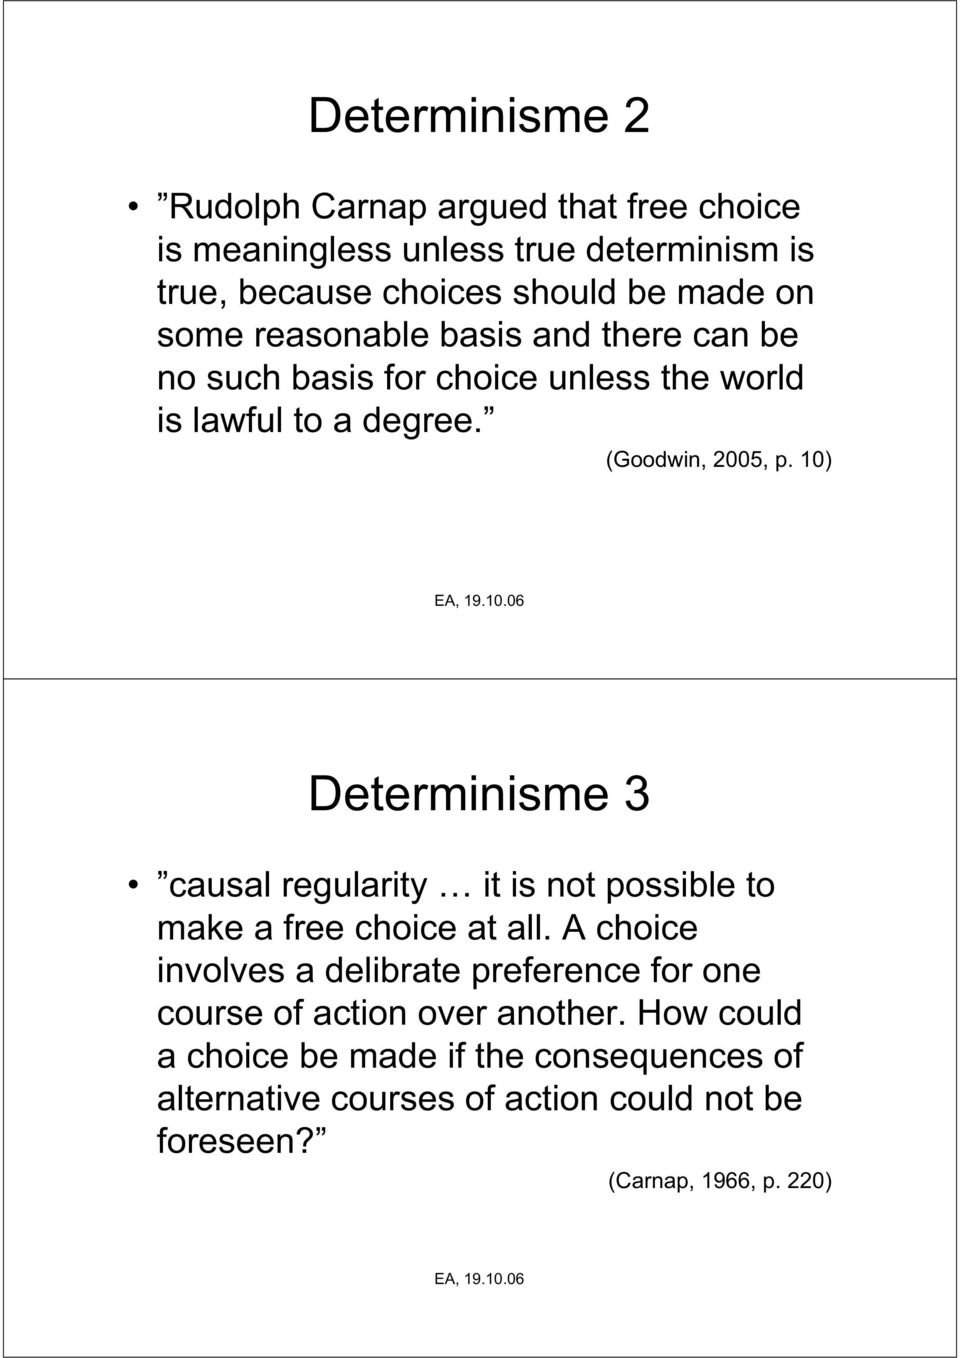 10) Determinisme 3 causal regularity it is not possible to make a free choice at all.